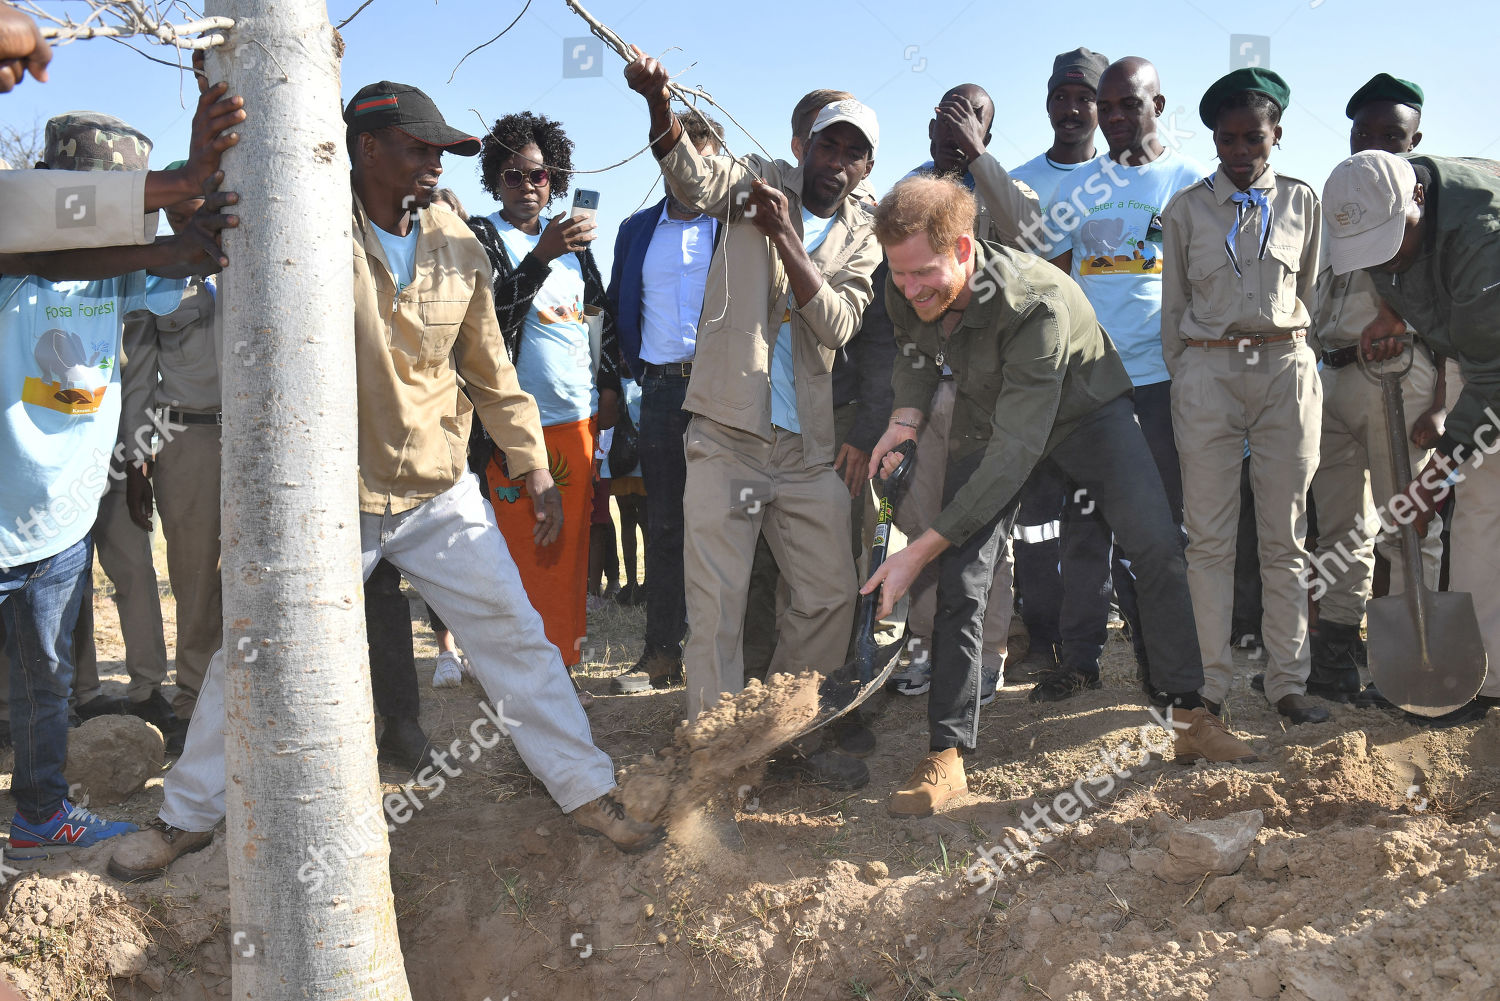 prince-harry-visit-to-africa-shutterstock-editorial-10424667d.jpg